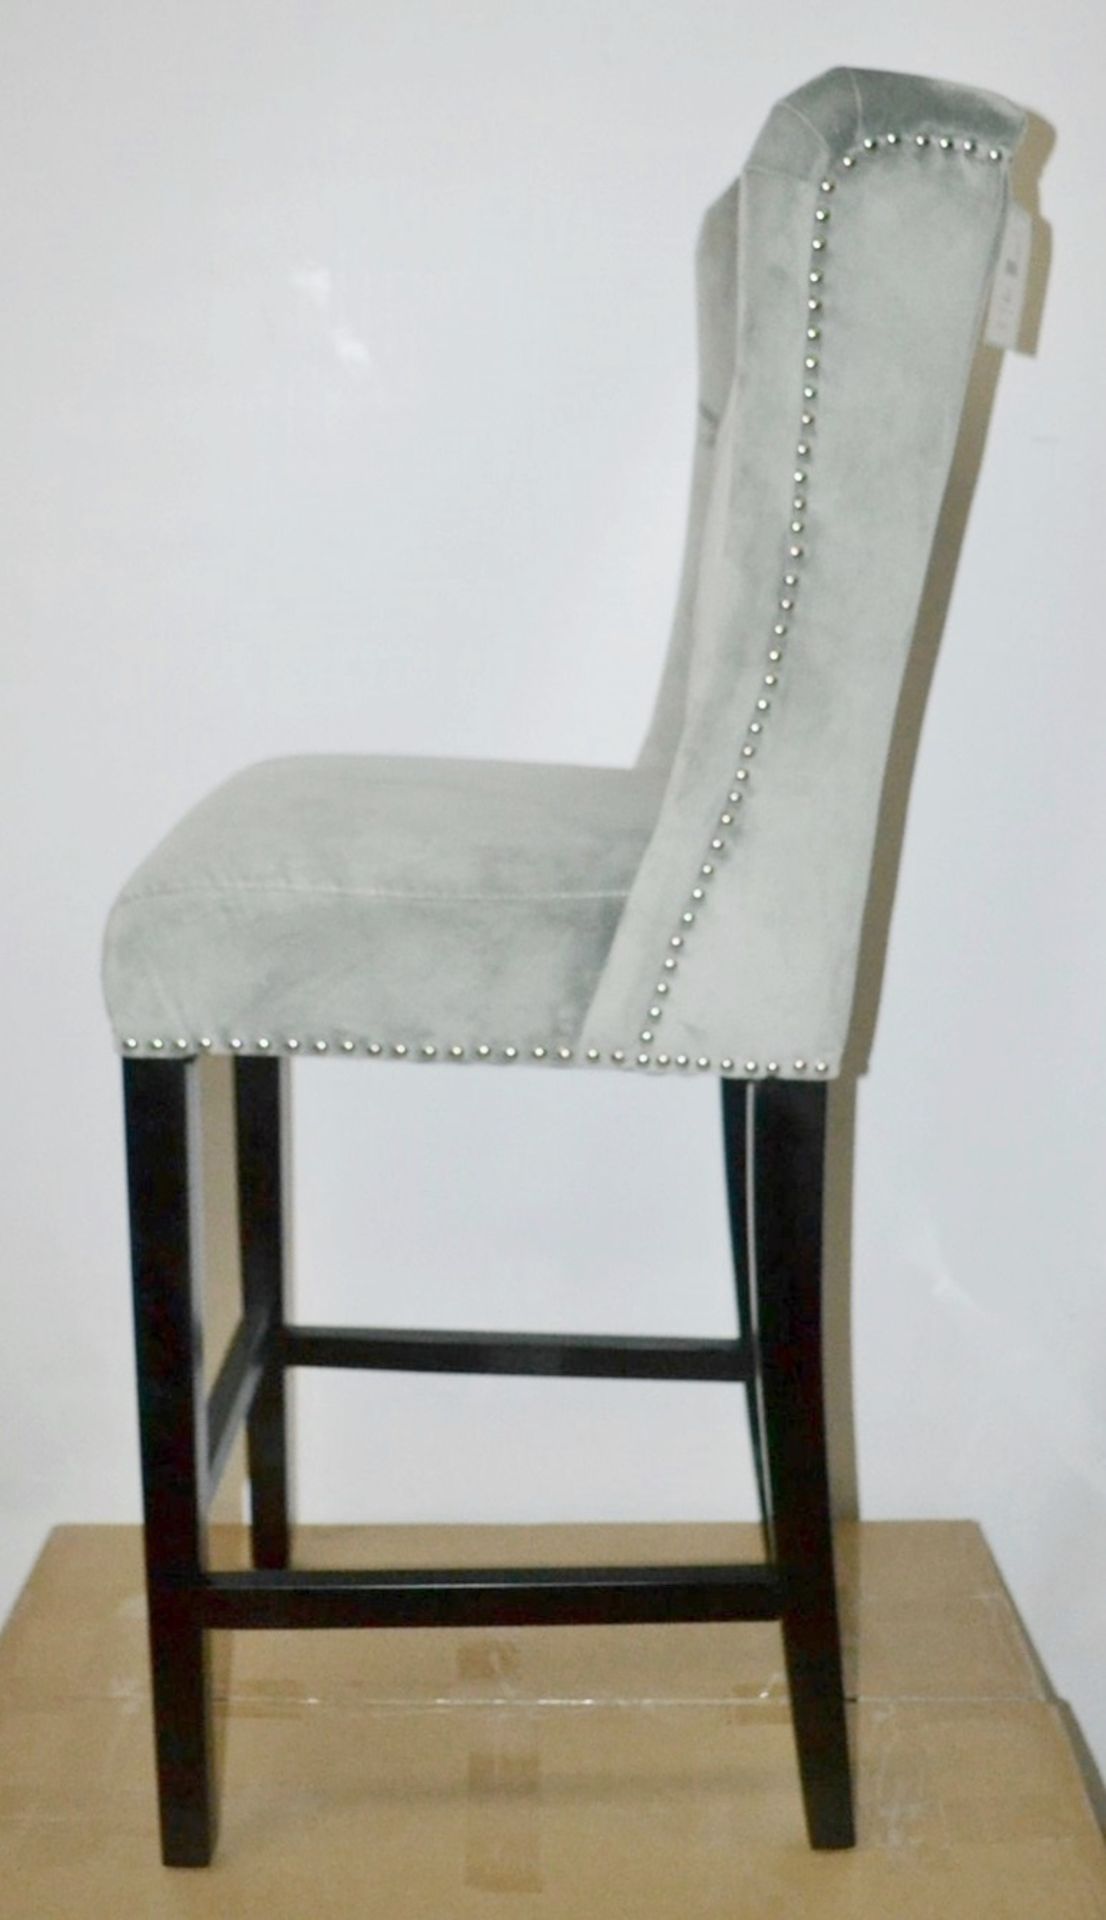 3 x HOUSE OF SPARKLES Luxury Wing Back Bar Stools In A Silver Velvet With BLACK Legs - Image 5 of 8